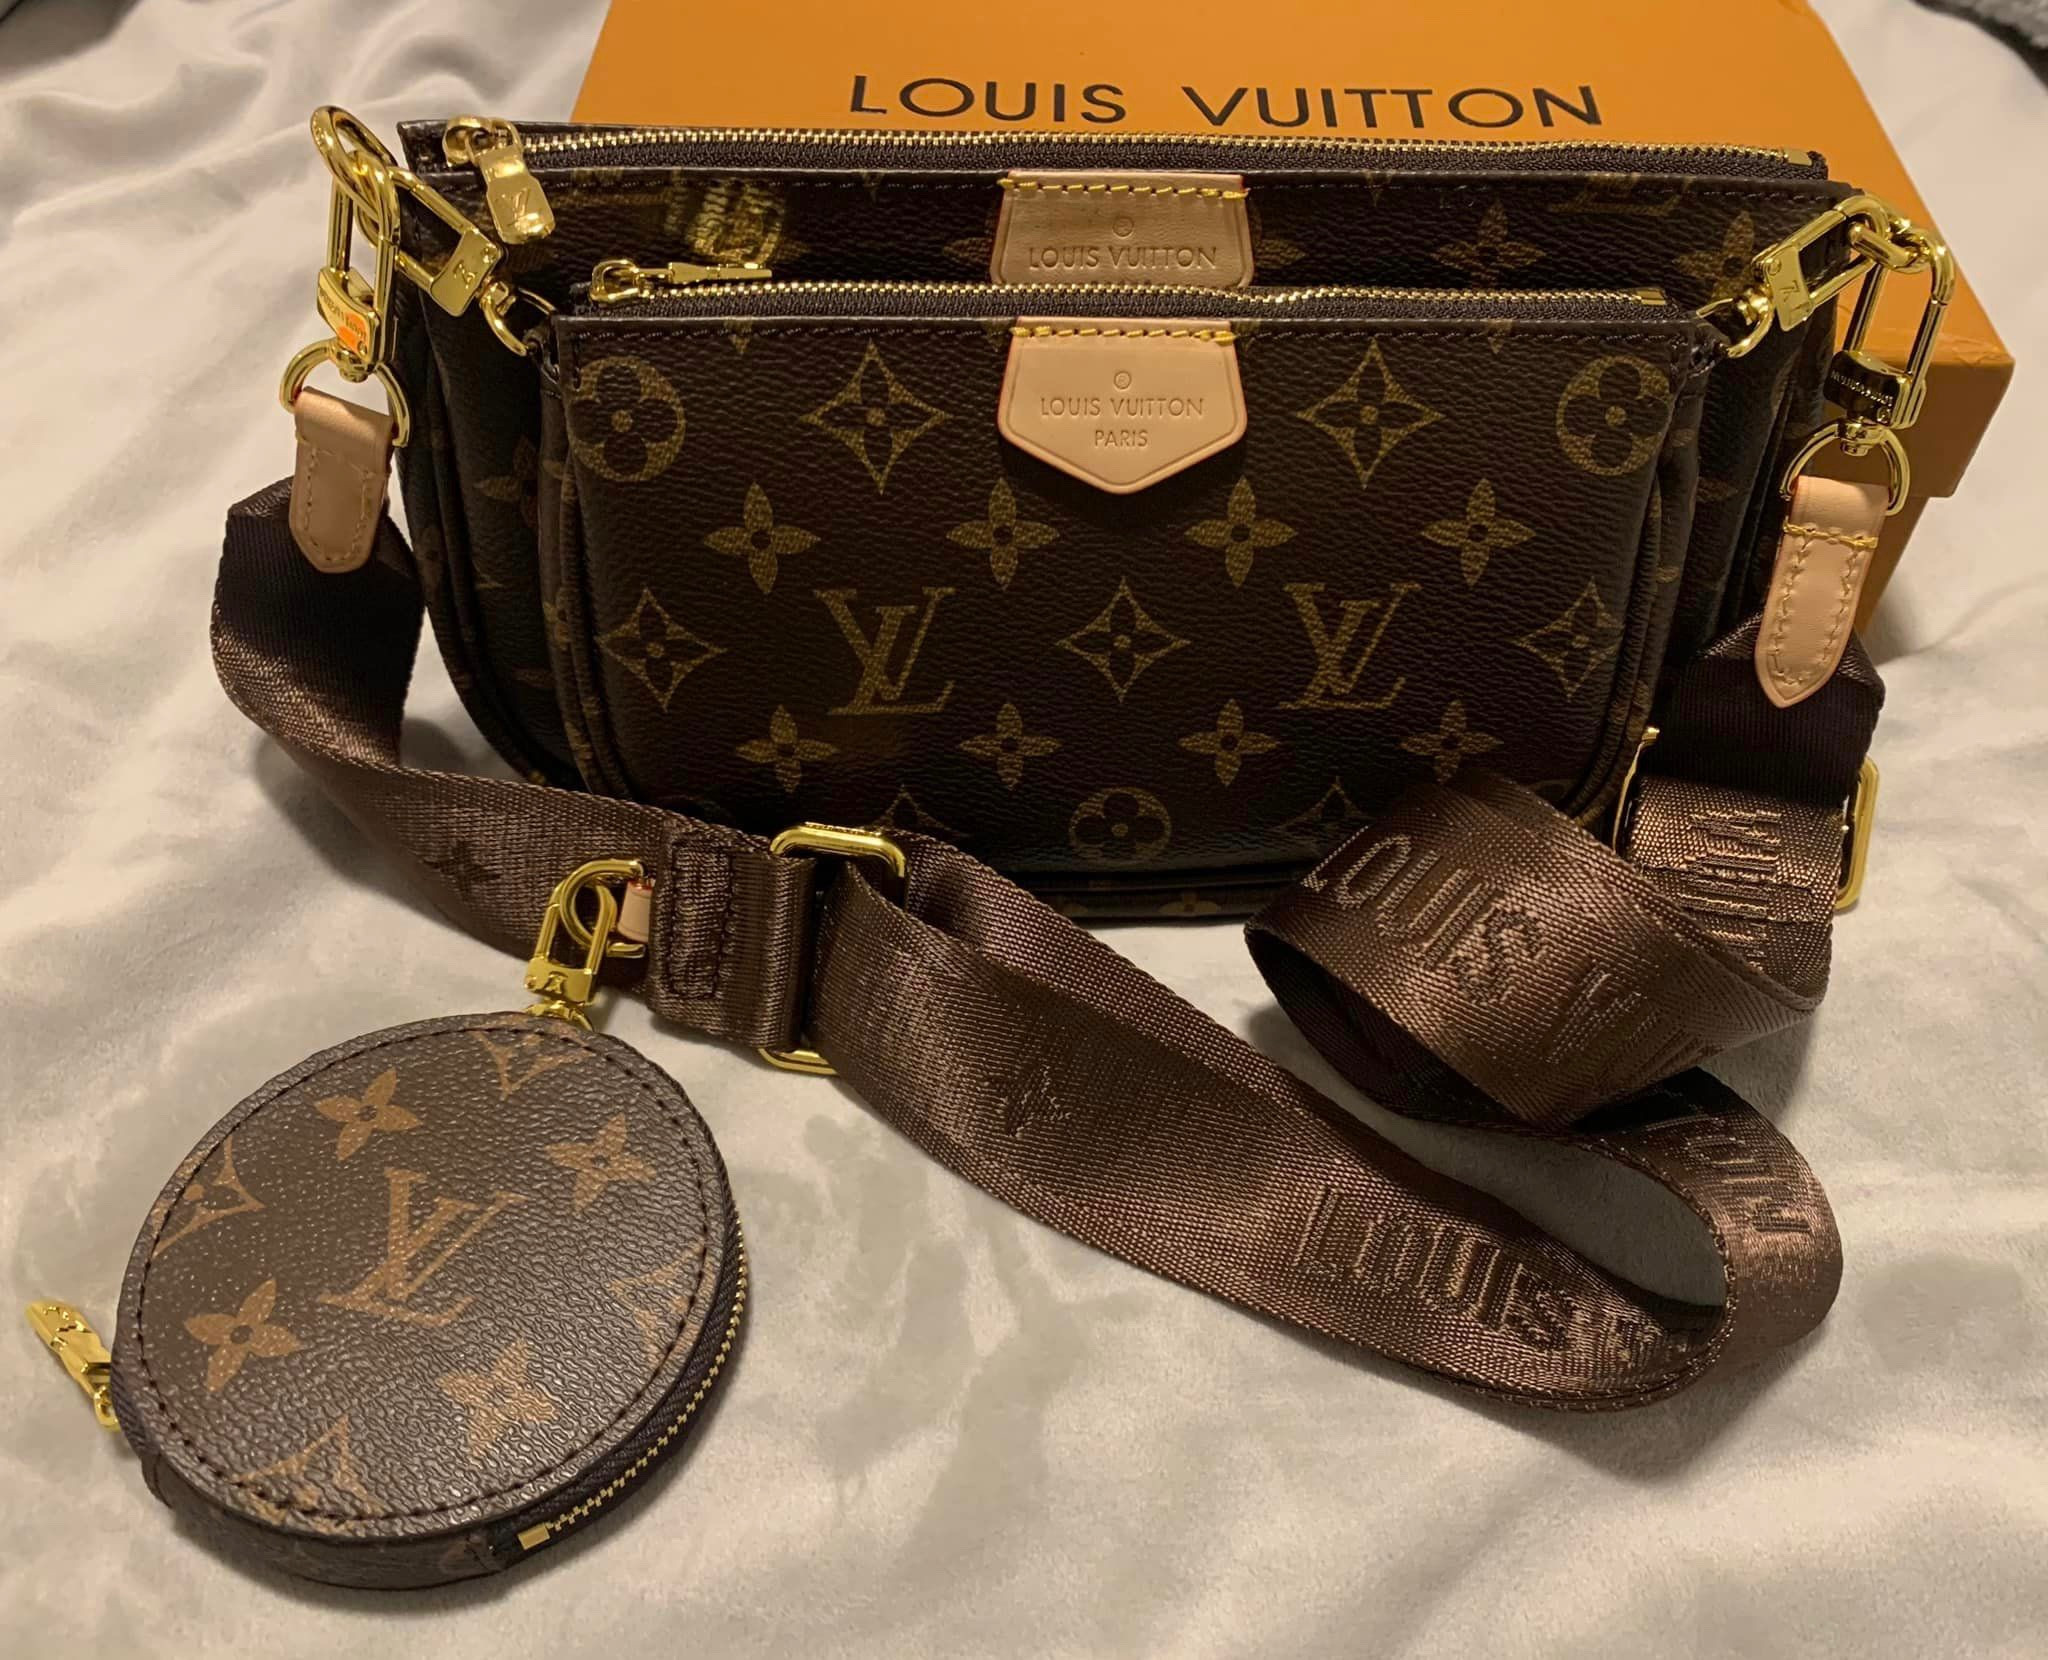 Replying to @lisamcmaree unboxing the louis vuitton pochette